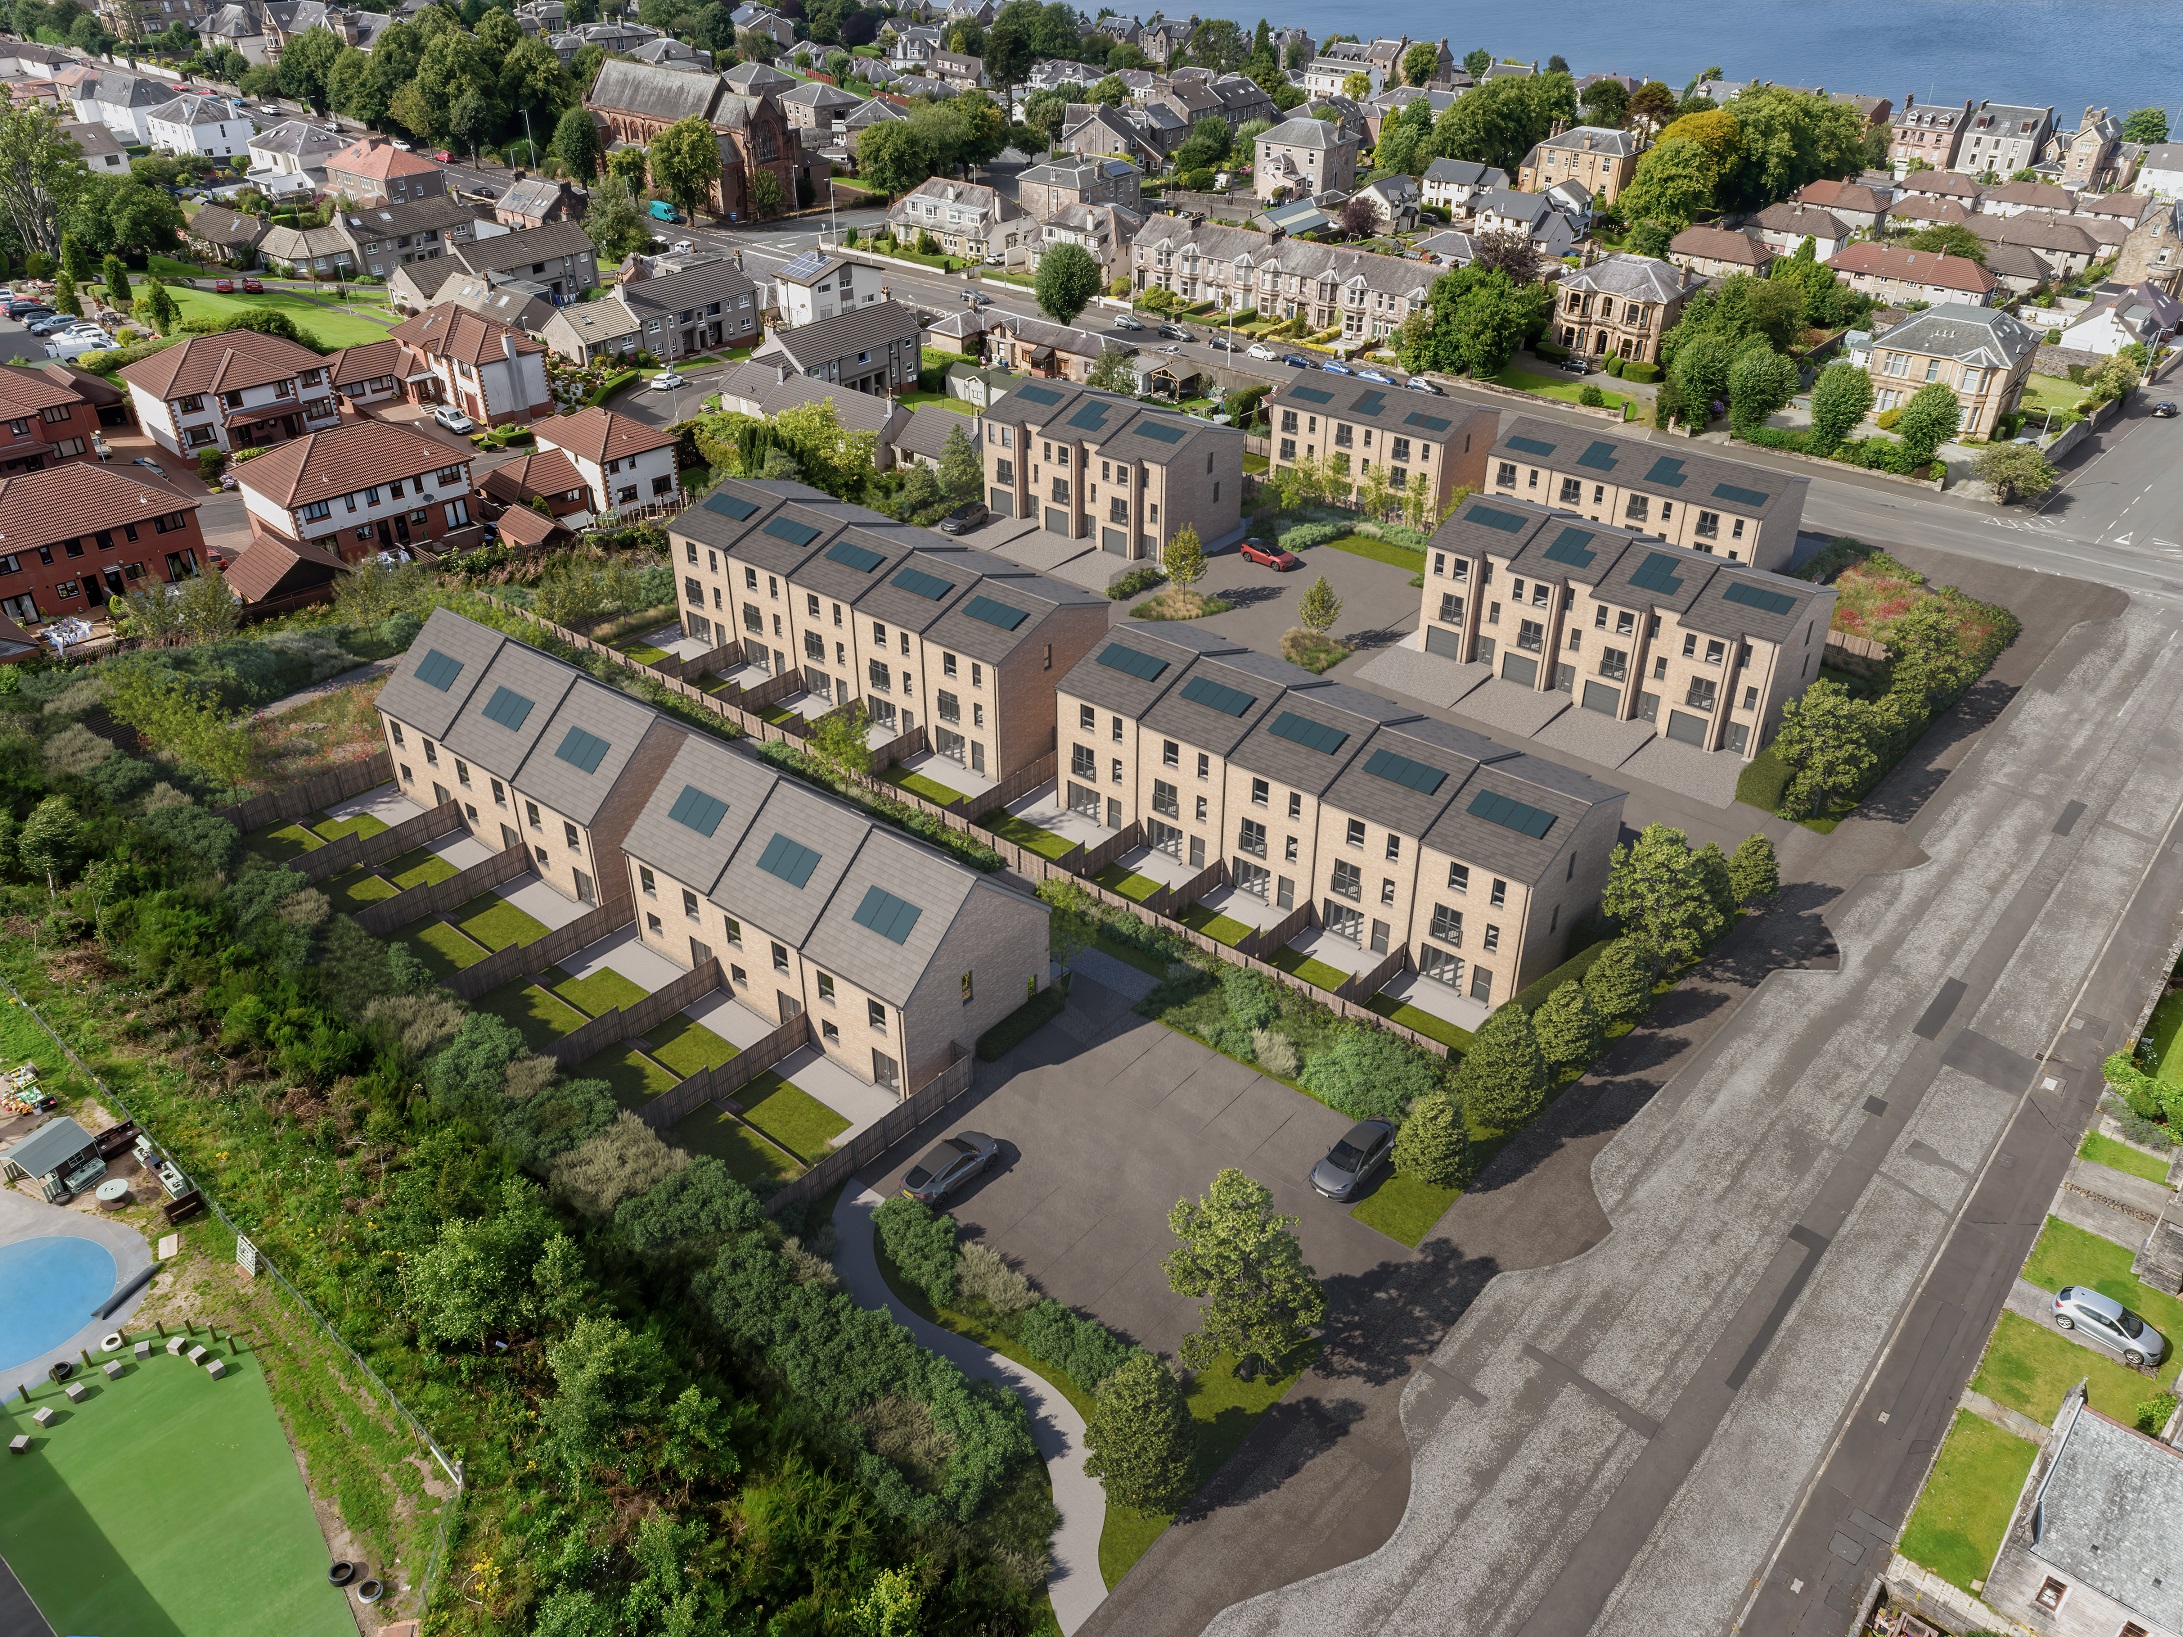 Work begins on new homes at former Greenock Academy site